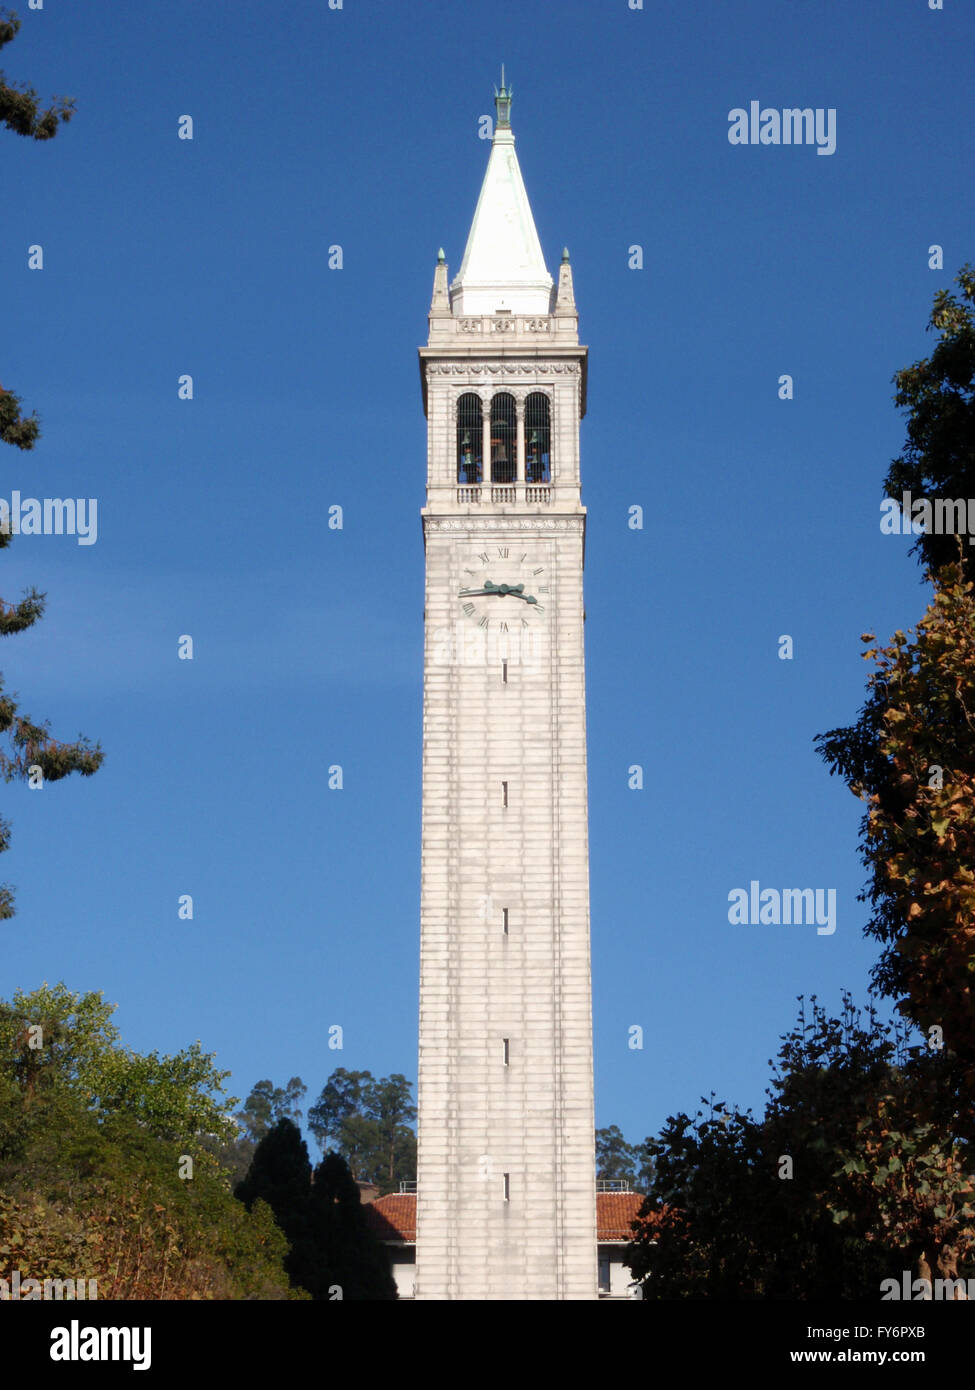 The Campanile also know as the Sather Tower at University of California, Berkeley stands above the trees Stock Photo